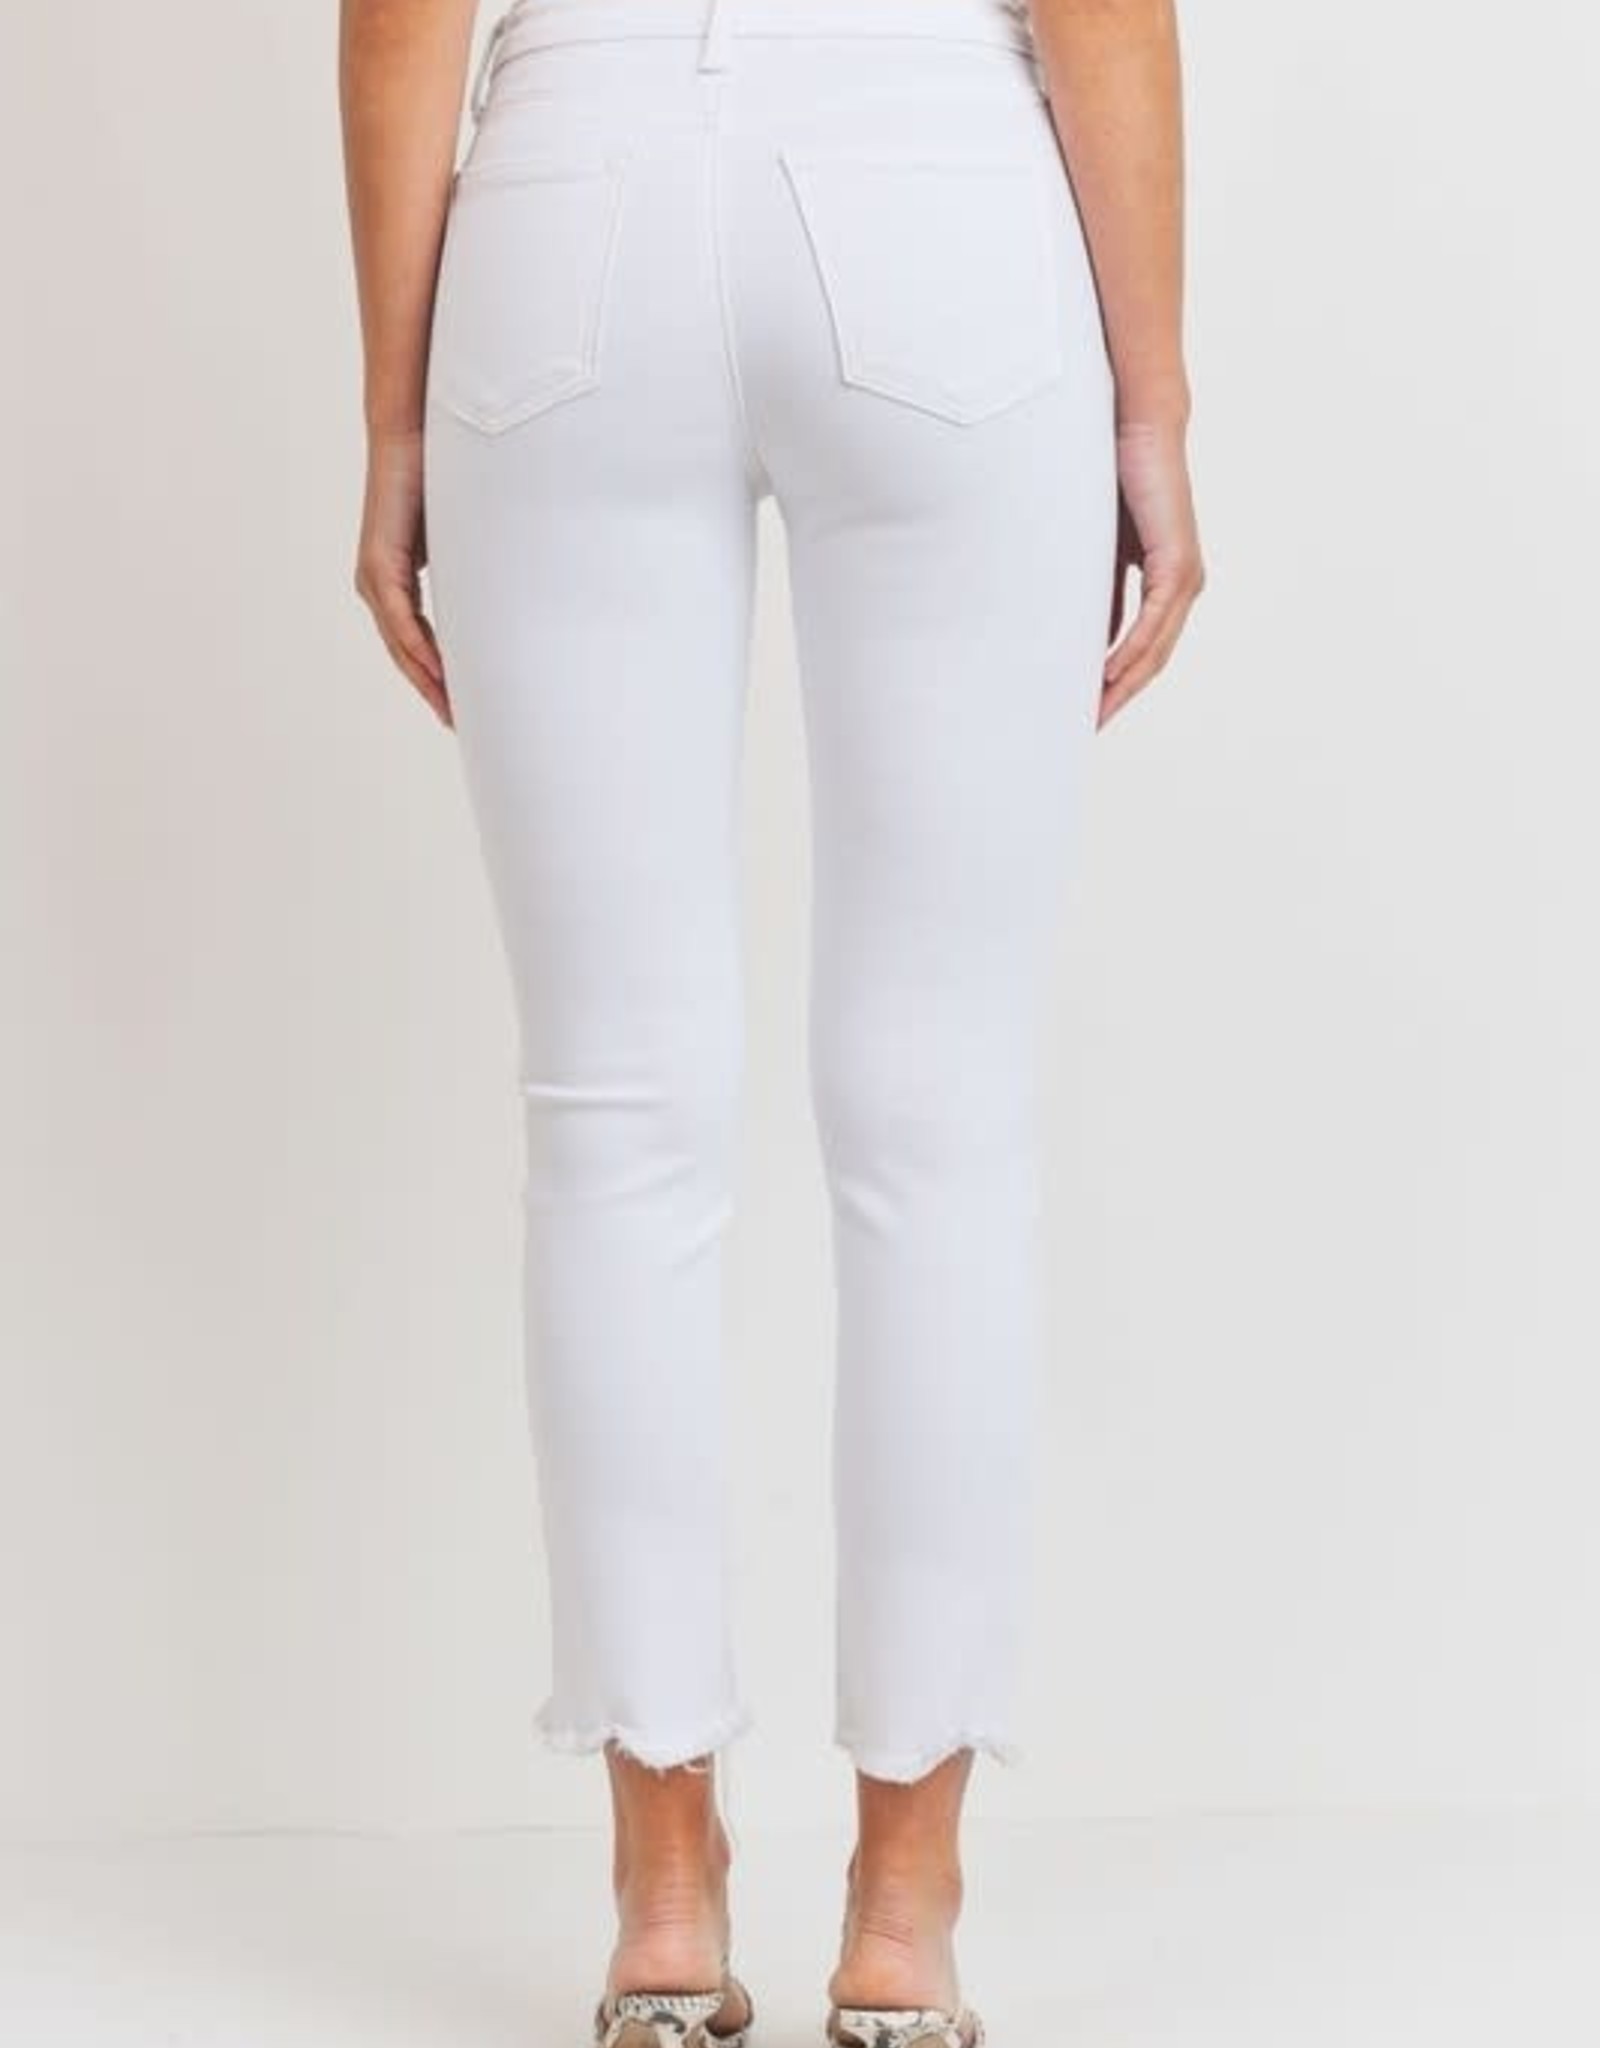 Blank Space Jeans